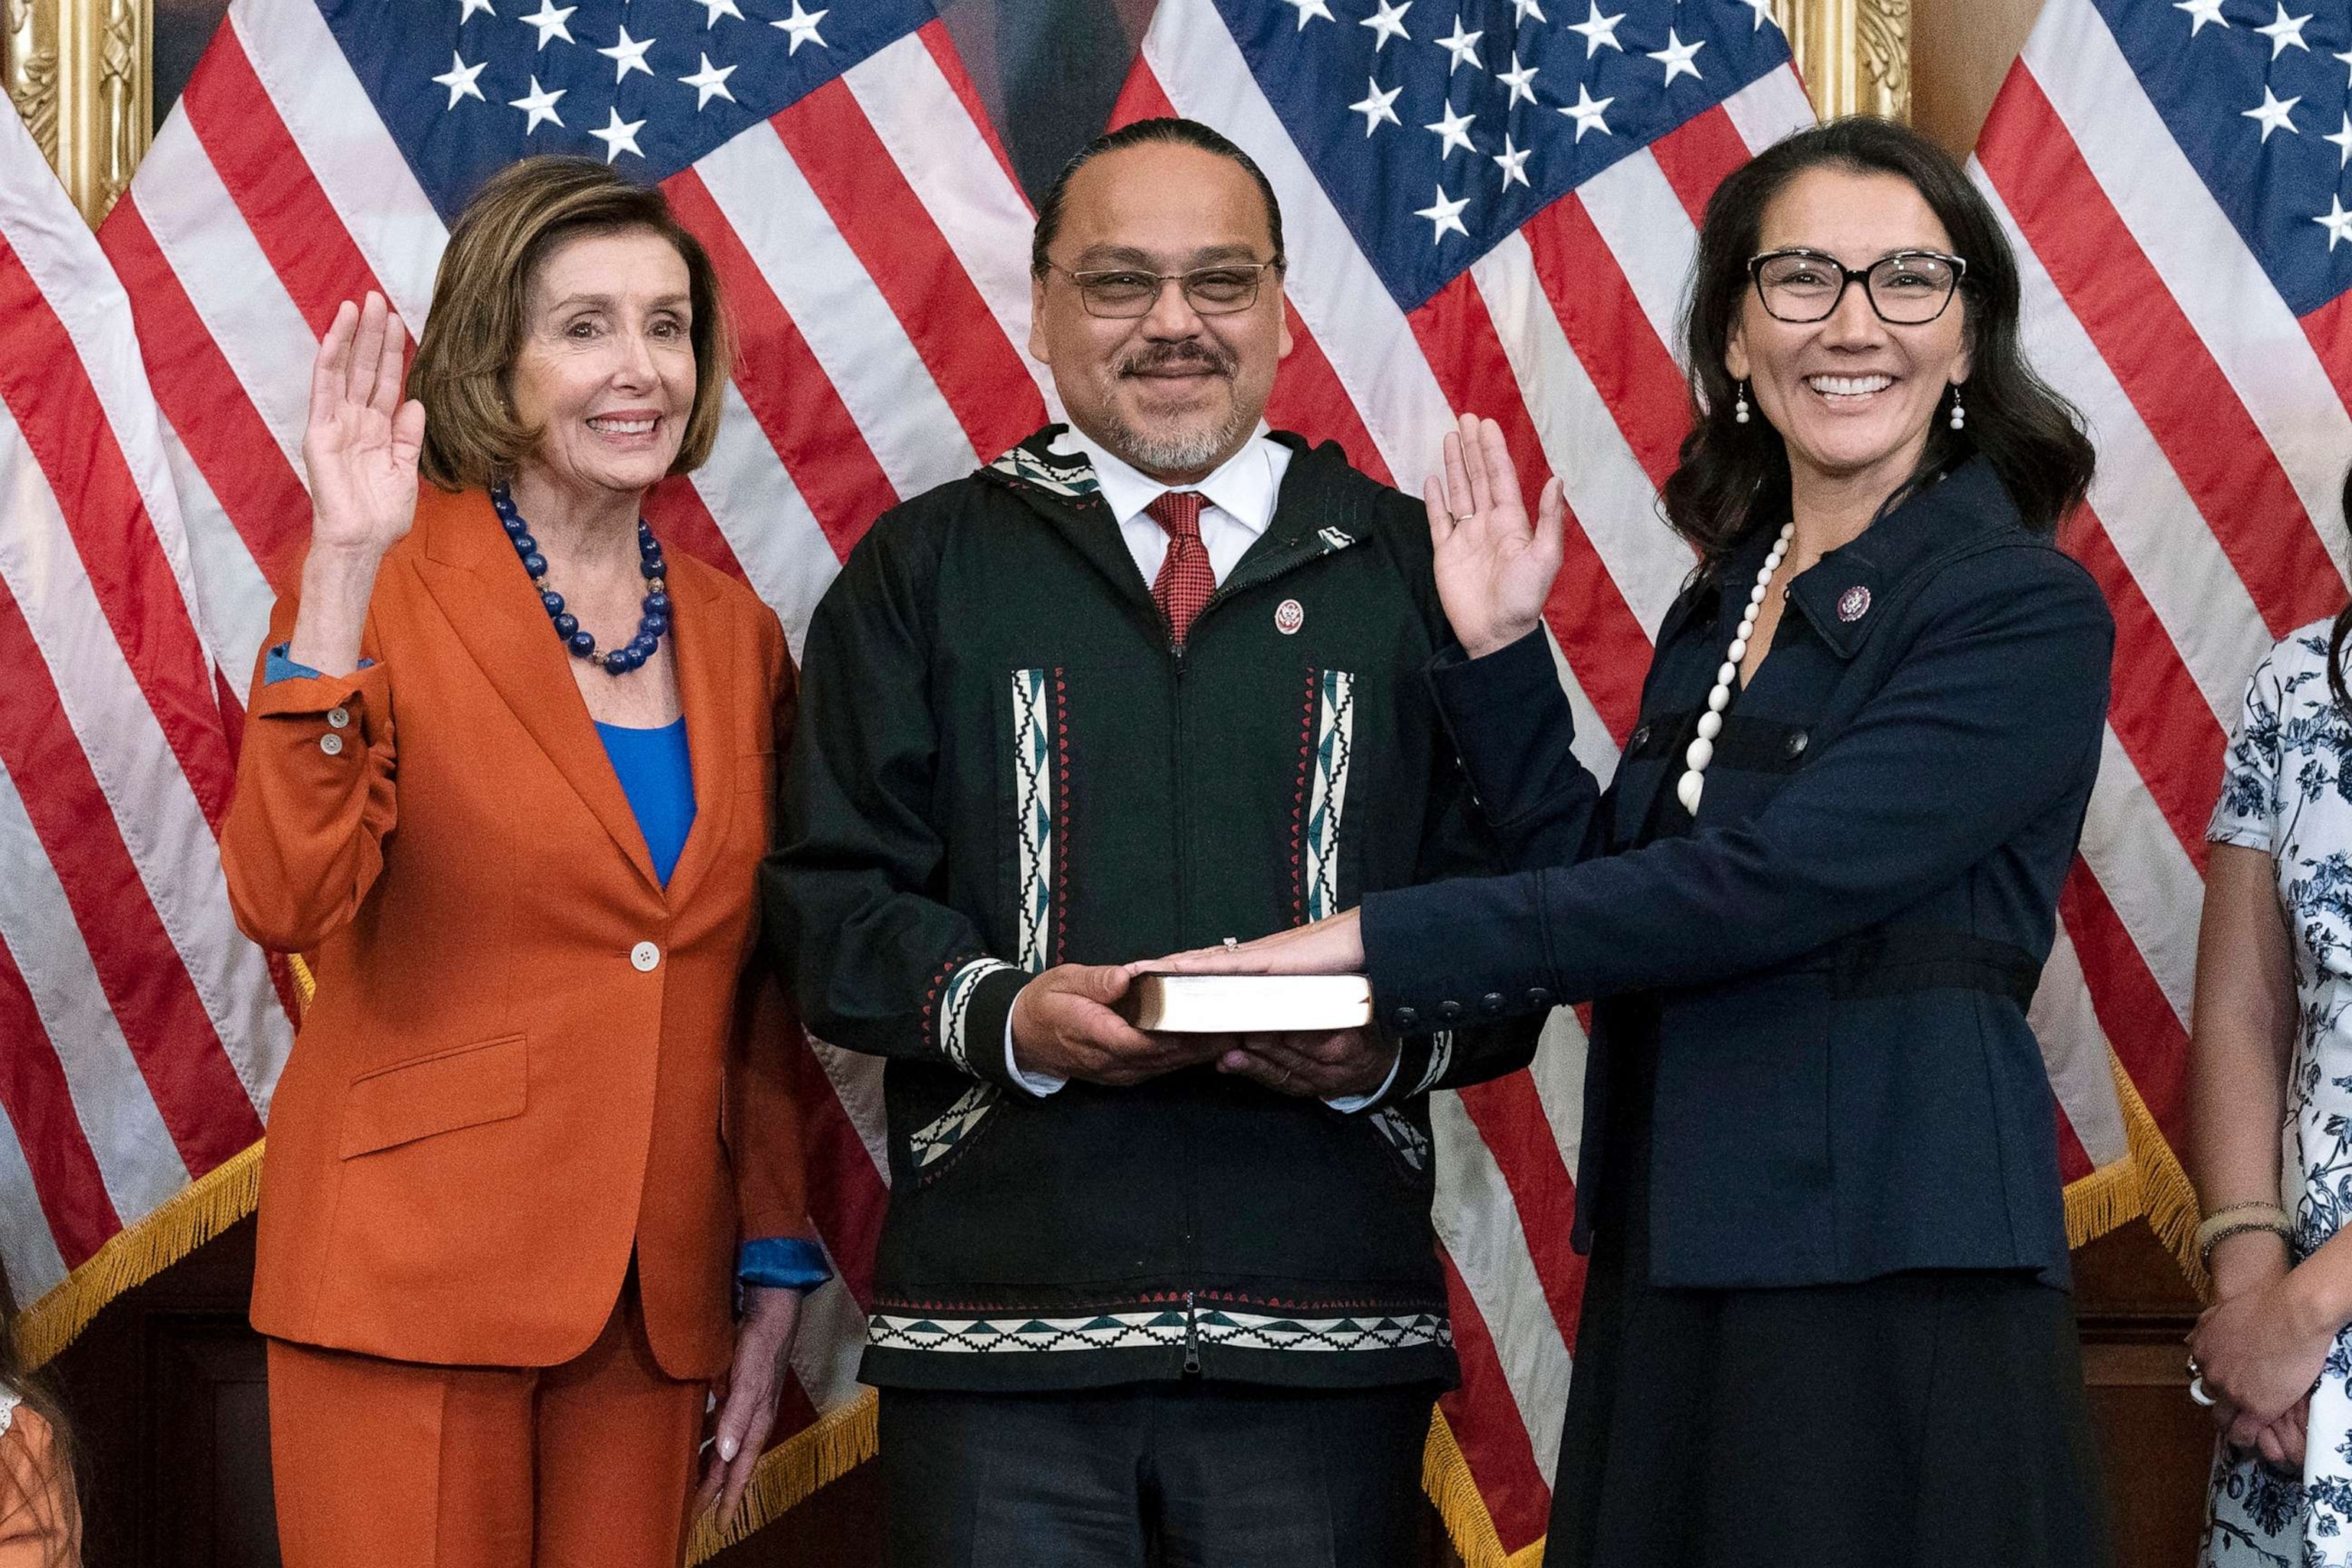 PHOTO: In this Sept. 13, 2022, file photo, Speaker of the House Nancy Pelosi administers the House oath of office to Rep. Mary Peltola, standing next to her husband Eugene "Buzzy" Peltola Jr., during a swearing-in on Capitol Hill in Washington, D.C.